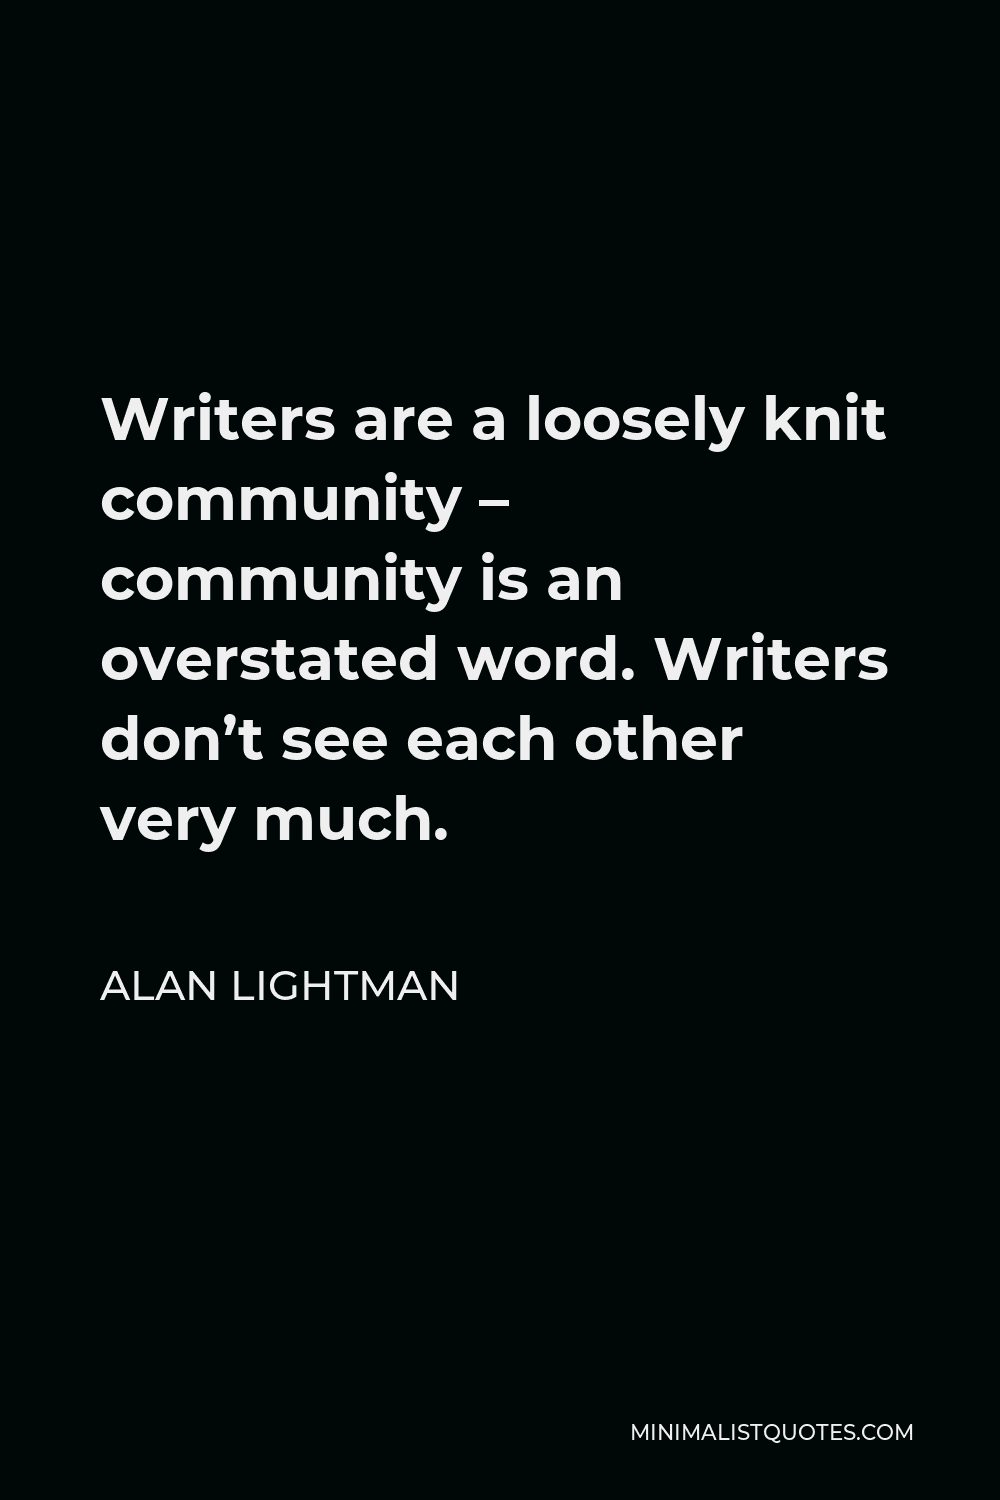 Alan Lightman Quote - Writers are a loosely knit community – community is an overstated word. Writers don’t see each other very much.